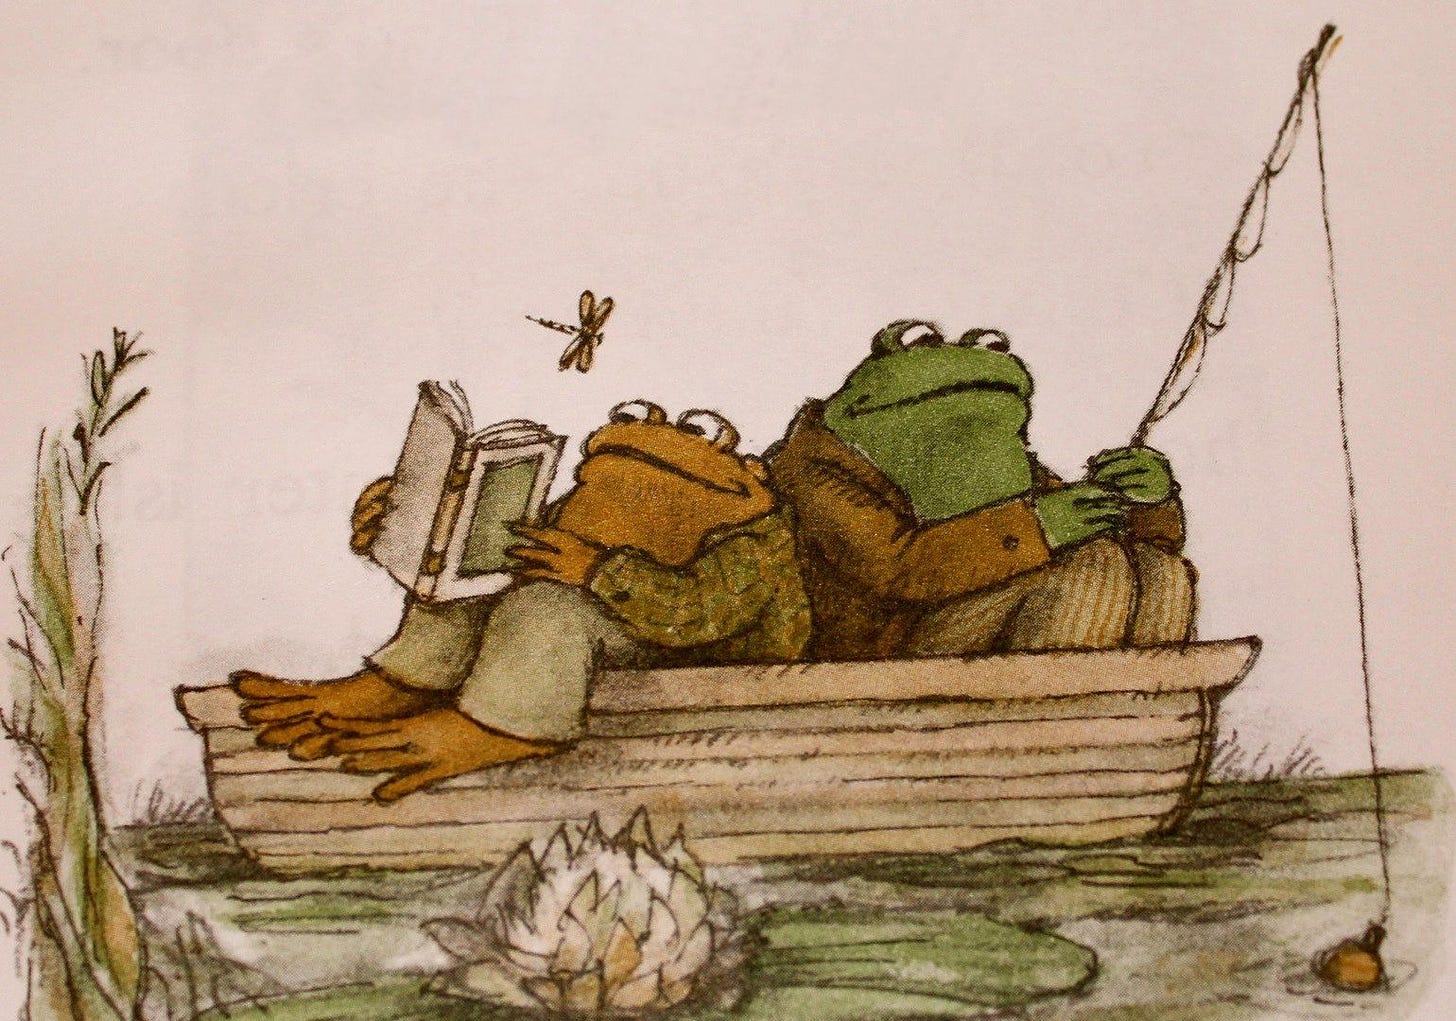 Frog and Toad go fishing by Arnold Lobel | Frog art, Frog and toad, Frog